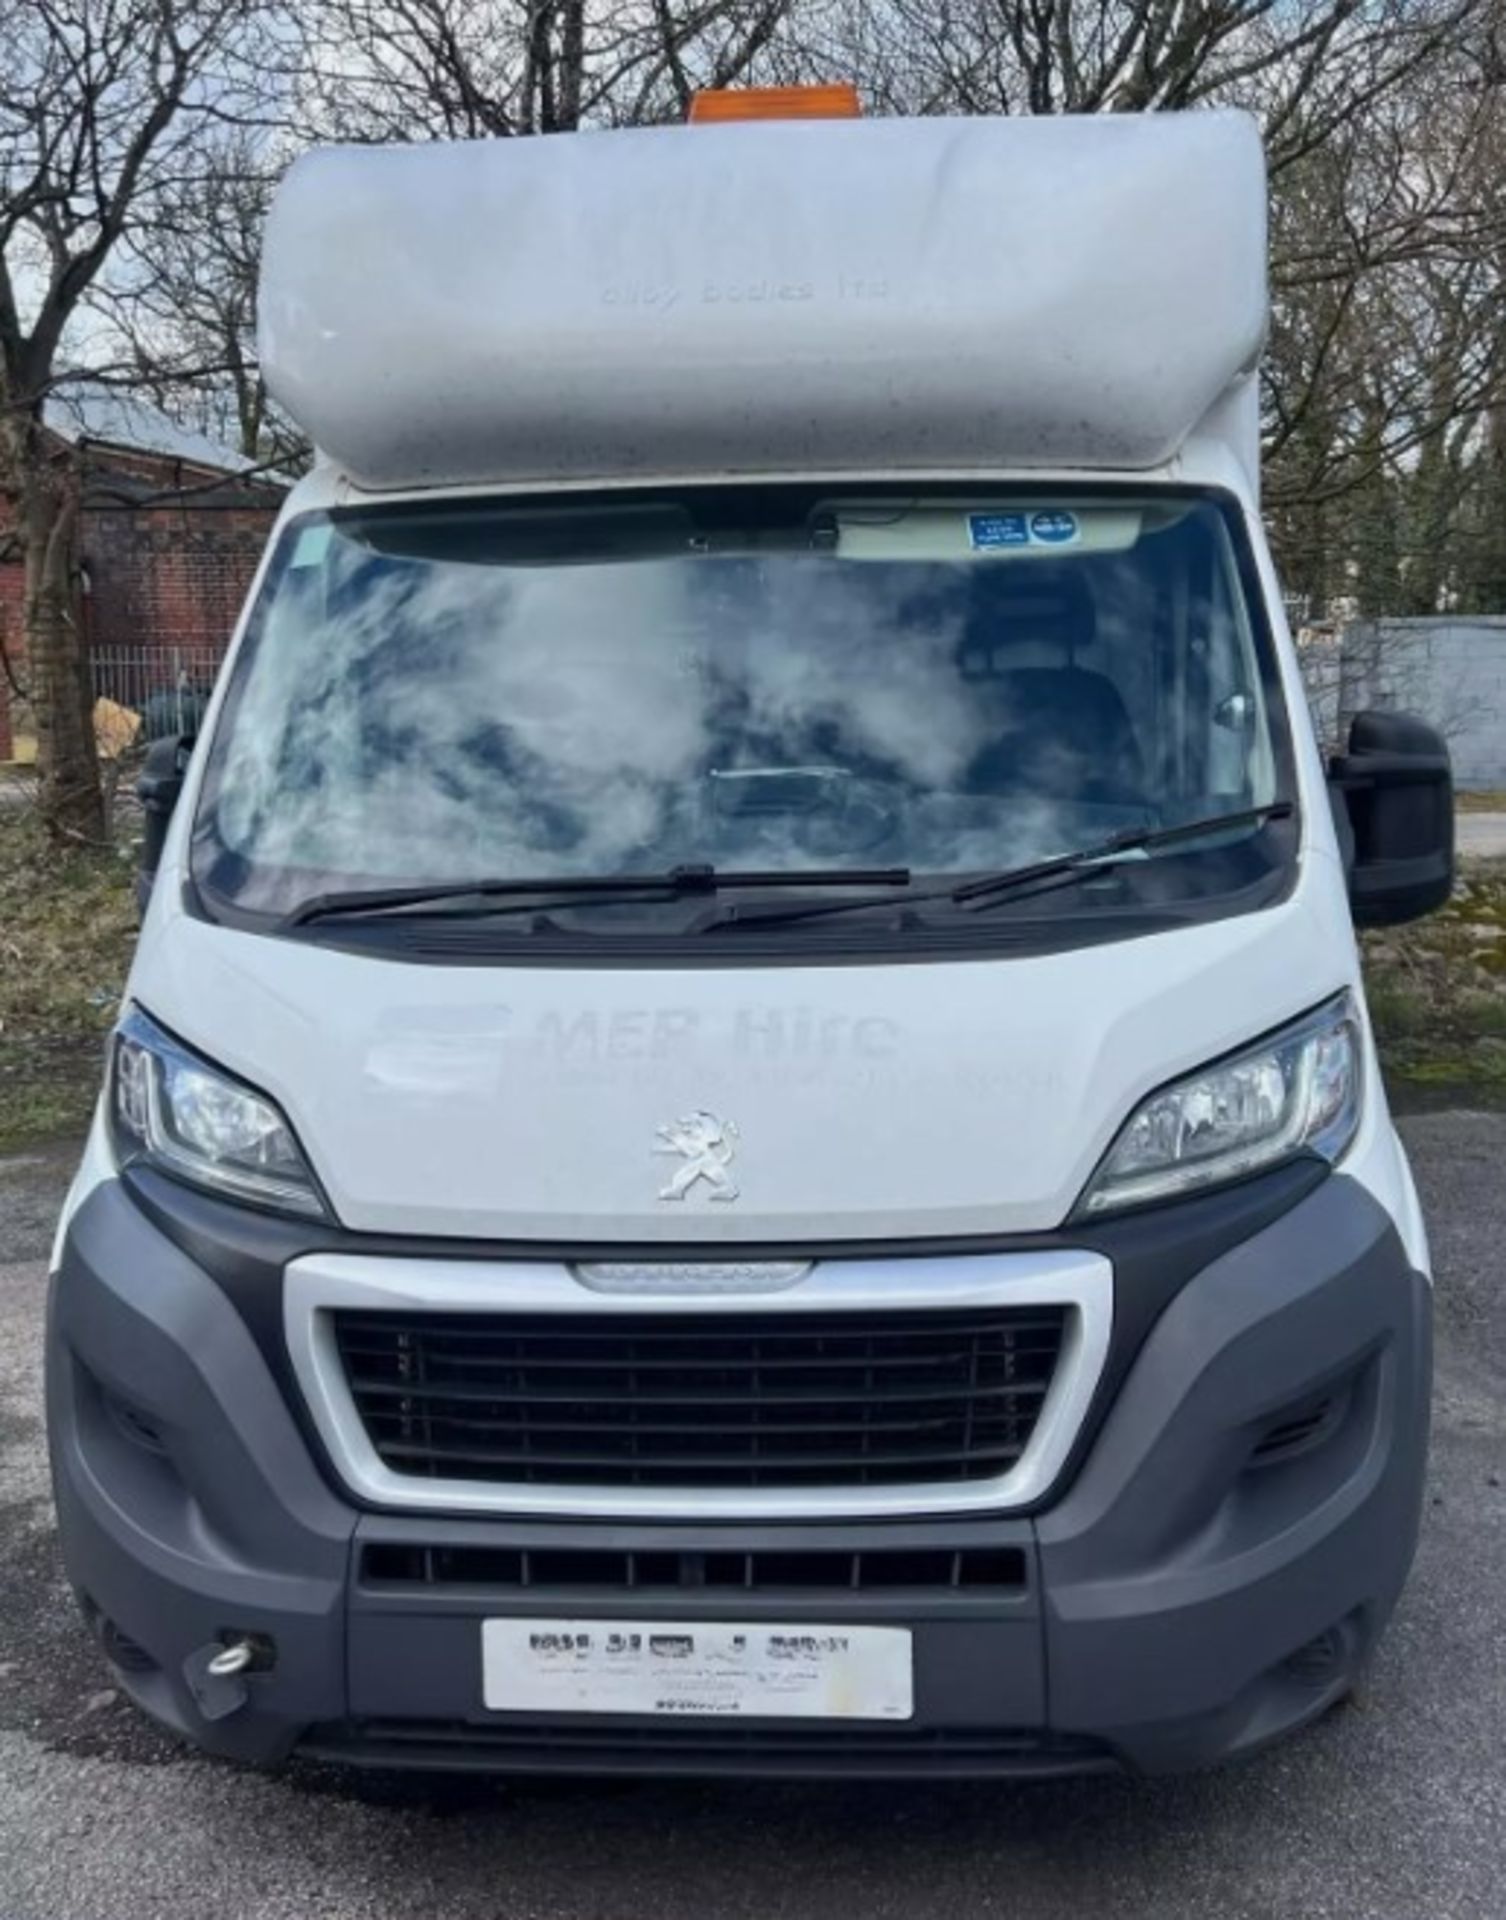 2017 PEUGEOT BOXER LWB LOW LOADER BOX WITH TAIL LIFT (SPARES OR REPAIRS) - Image 2 of 7